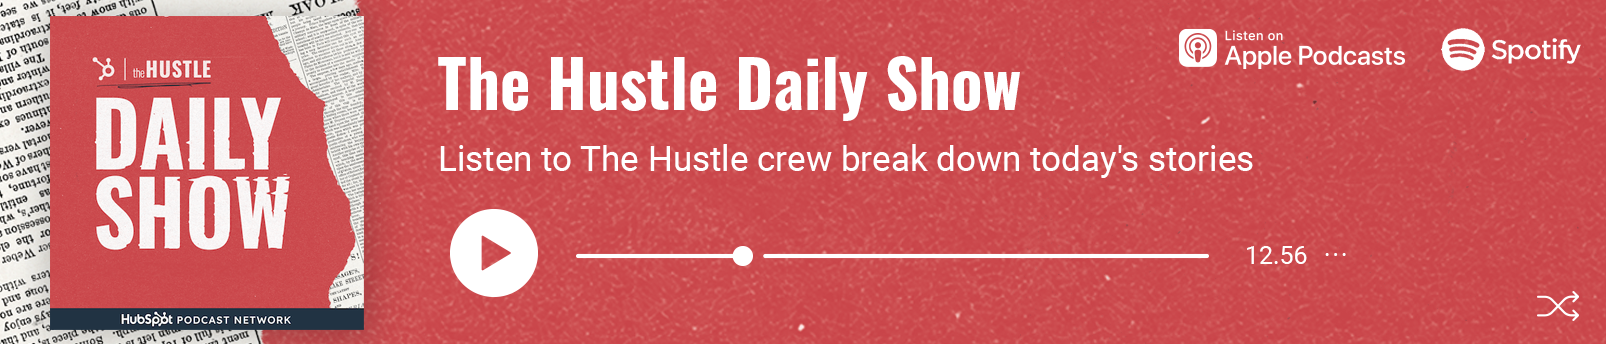 The Hustle Daily Show media player